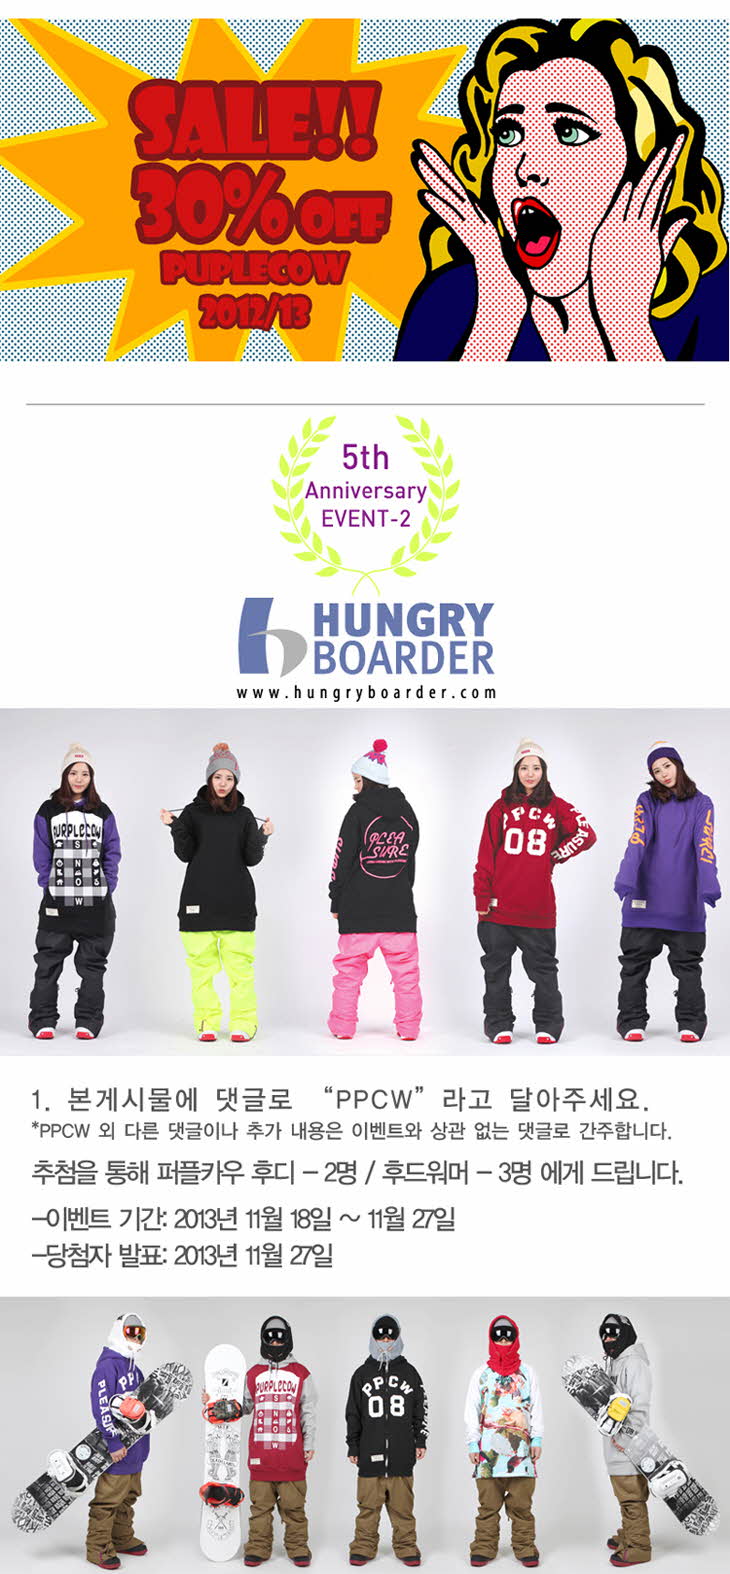 re_ppcw-5th-anniversary-event-hungryboarder-03.jpg